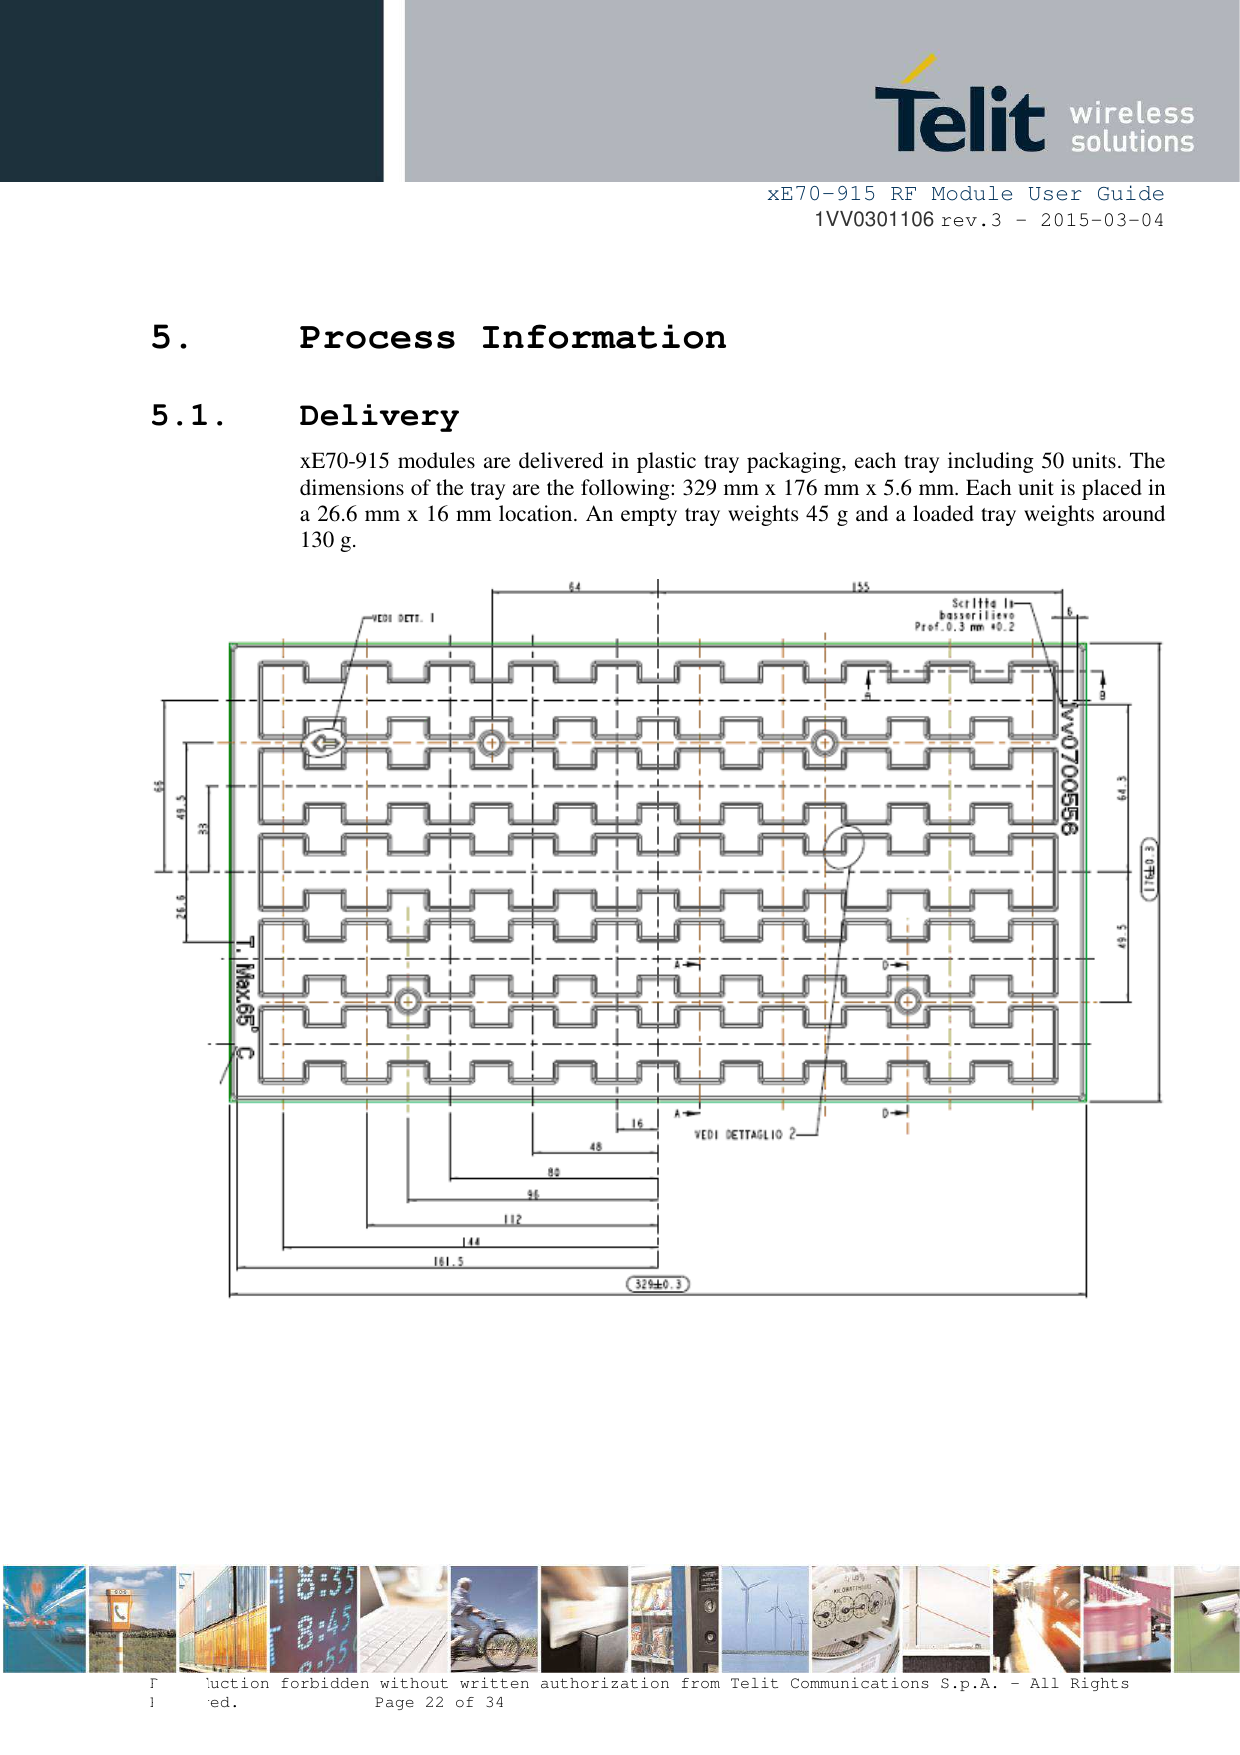     xE70-915 RF Module User Guide 1VV0301106 rev.3 – 2015-03-04  Reproduction forbidden without written authorization from Telit Communications S.p.A. - All Rights Reserved.    Page 22 of 34  5. Process Information 5.1. Delivery xE70-915 modules are delivered in plastic tray packaging, each tray including 50 units. The dimensions of the tray are the following: 329 mm x 176 mm x 5.6 mm. Each unit is placed in a 26.6 mm x 16 mm location. An empty tray weights 45 g and a loaded tray weights around 130 g.         